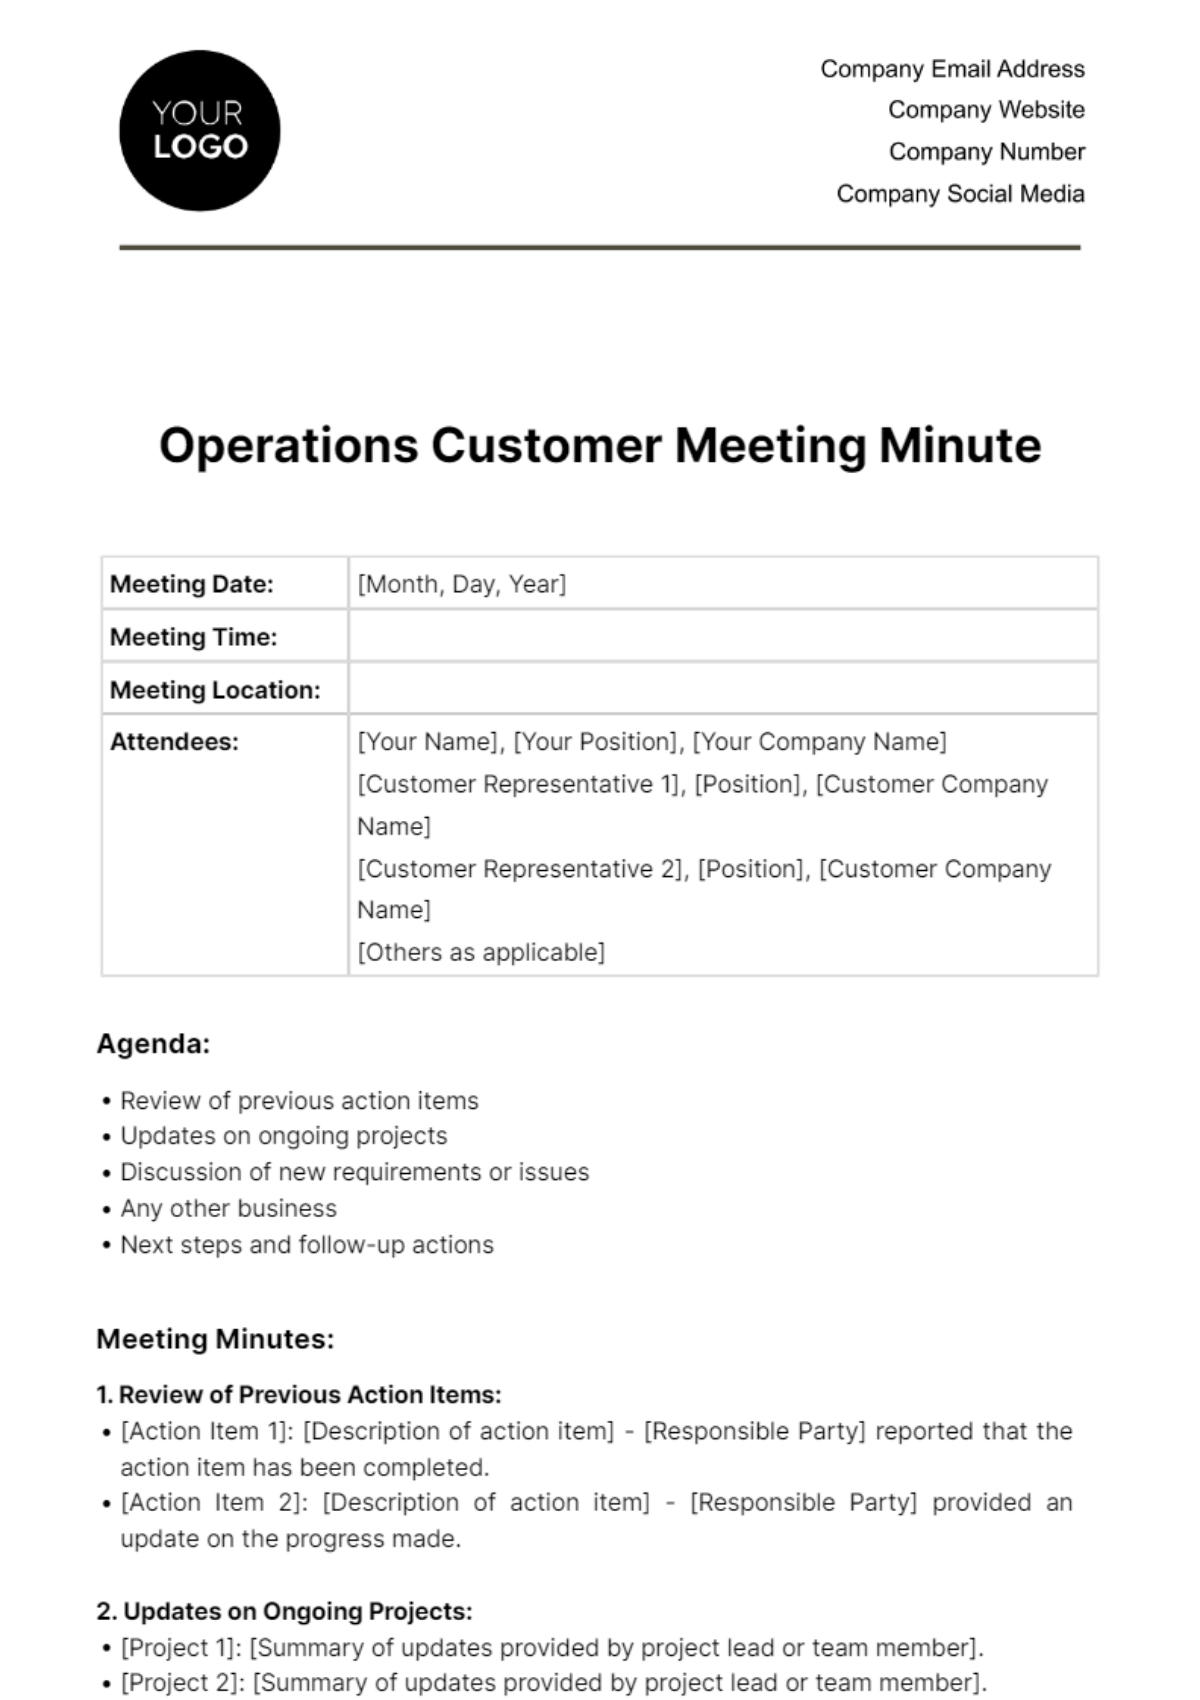 Operations Customer Meeting Minute Template